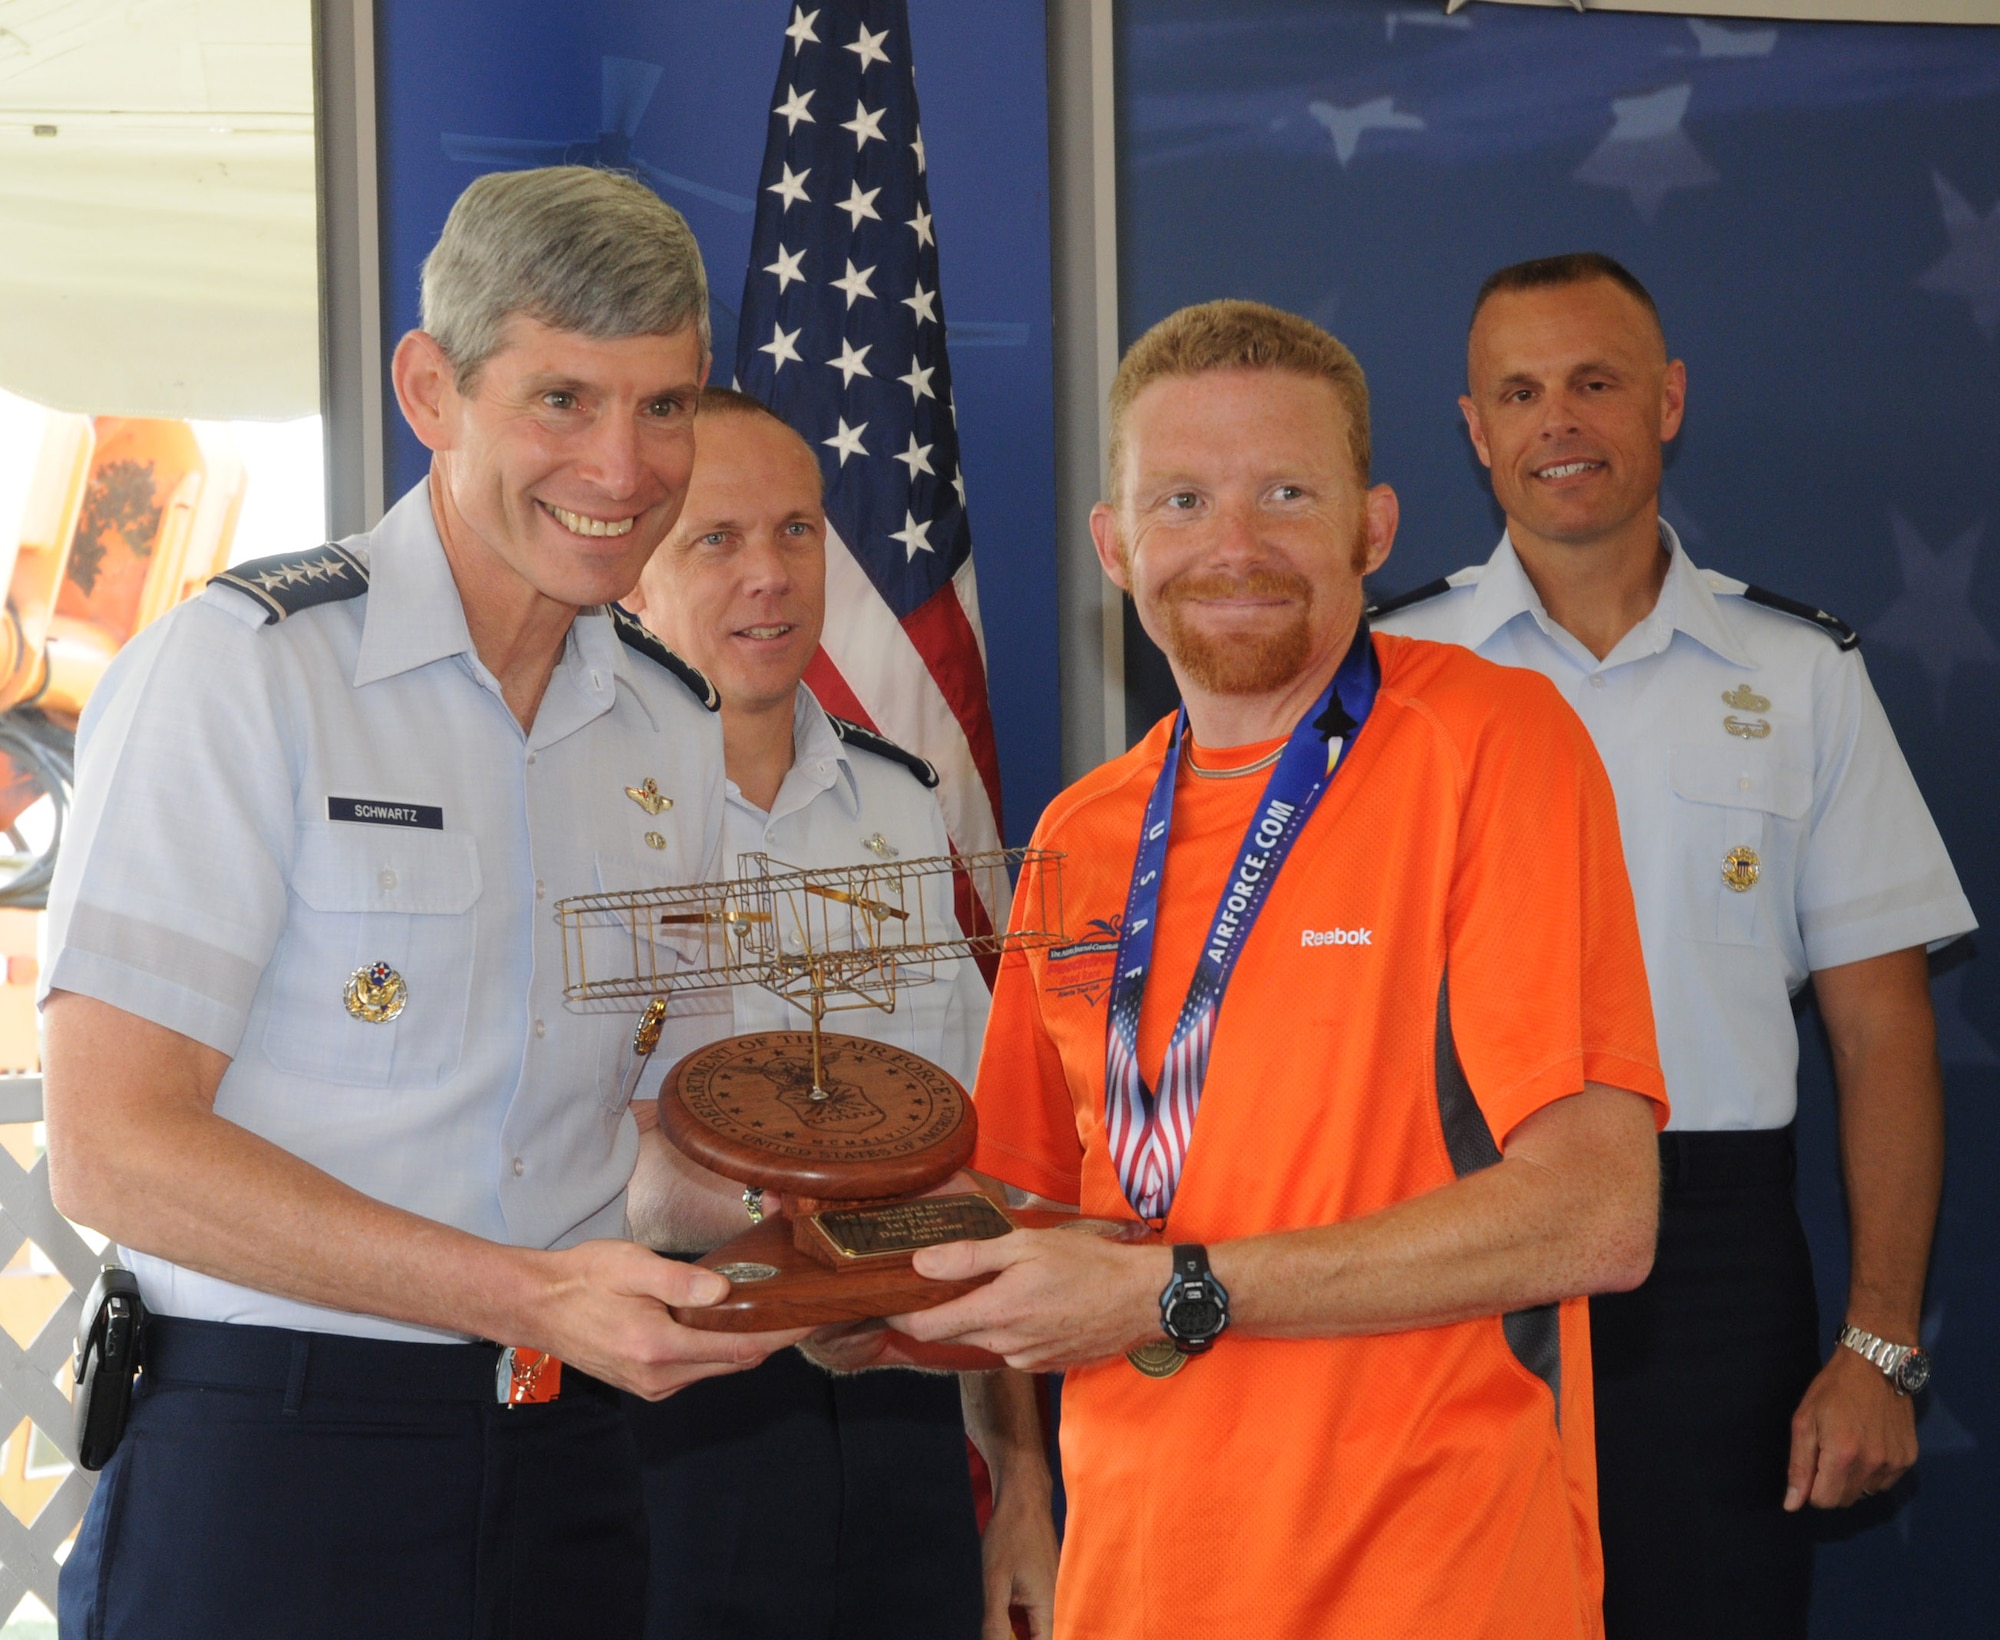 Gen. Norton Schwartz, Air Force Chief of Staff, gives a trophy to Dave Johnston, the male winner of the full marathon.  (US Air Force photo by Al Bright)